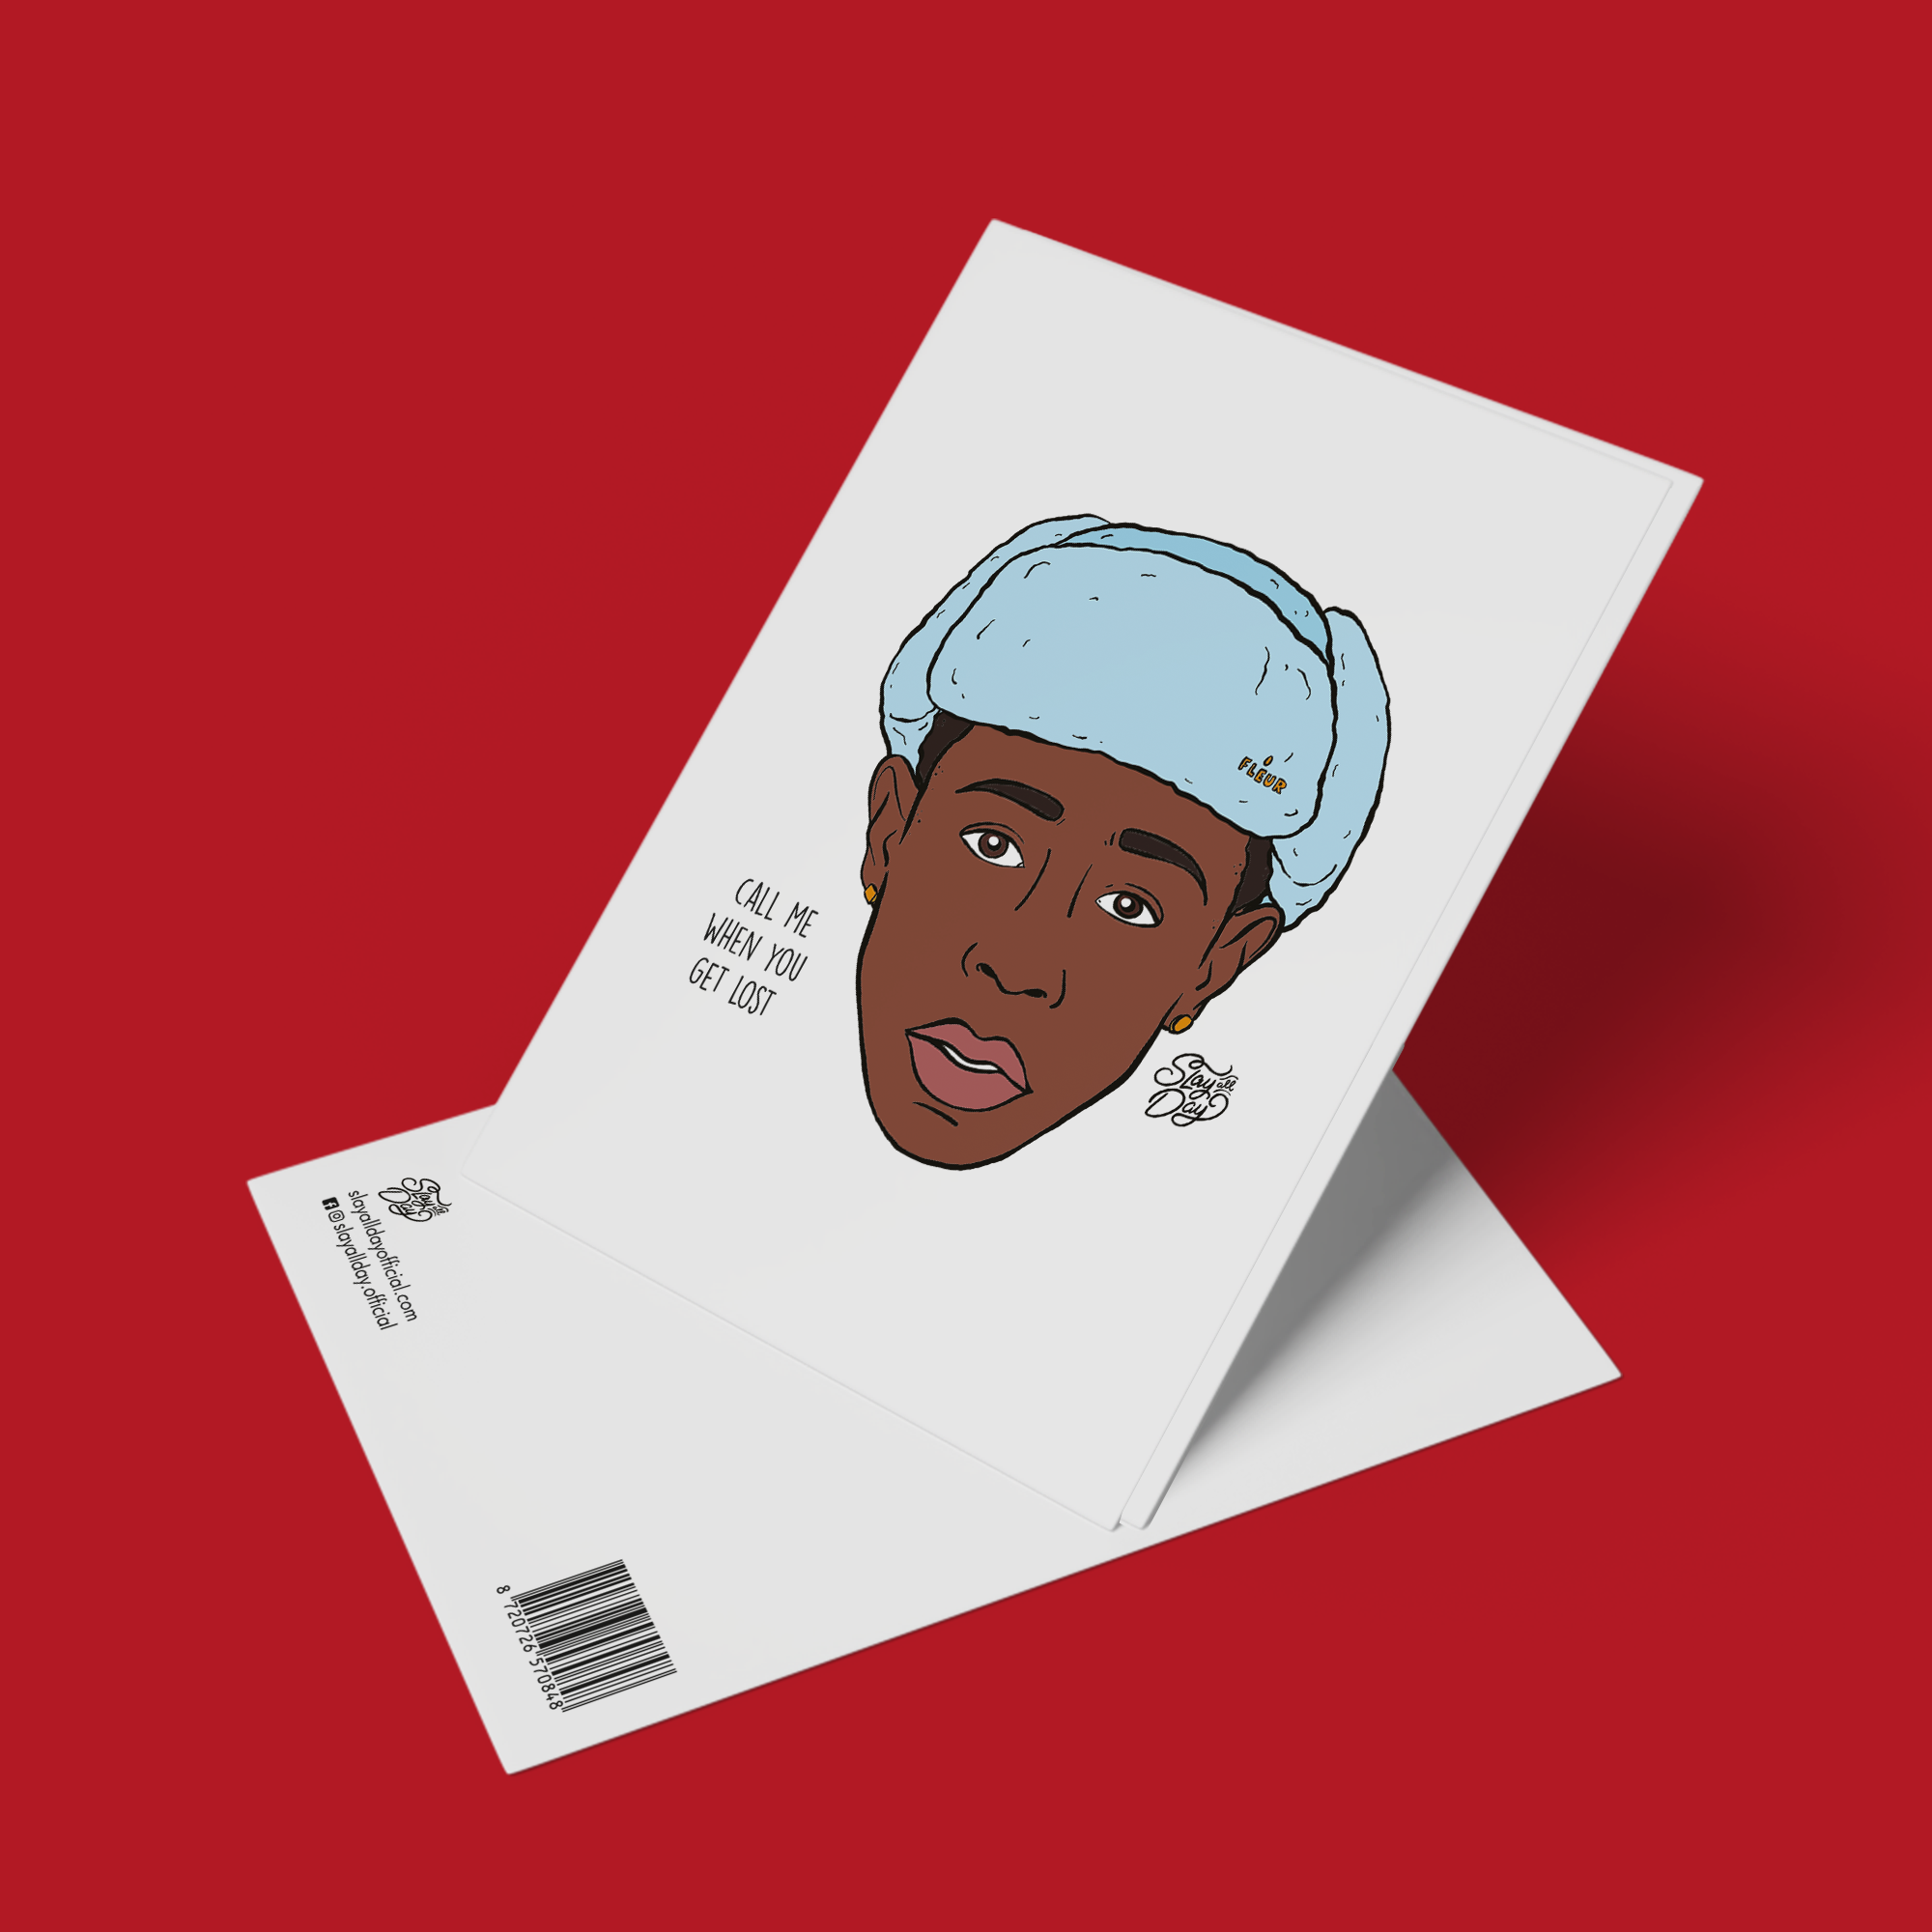 Tyler, the Creator | Call me when you get lost - Postcard